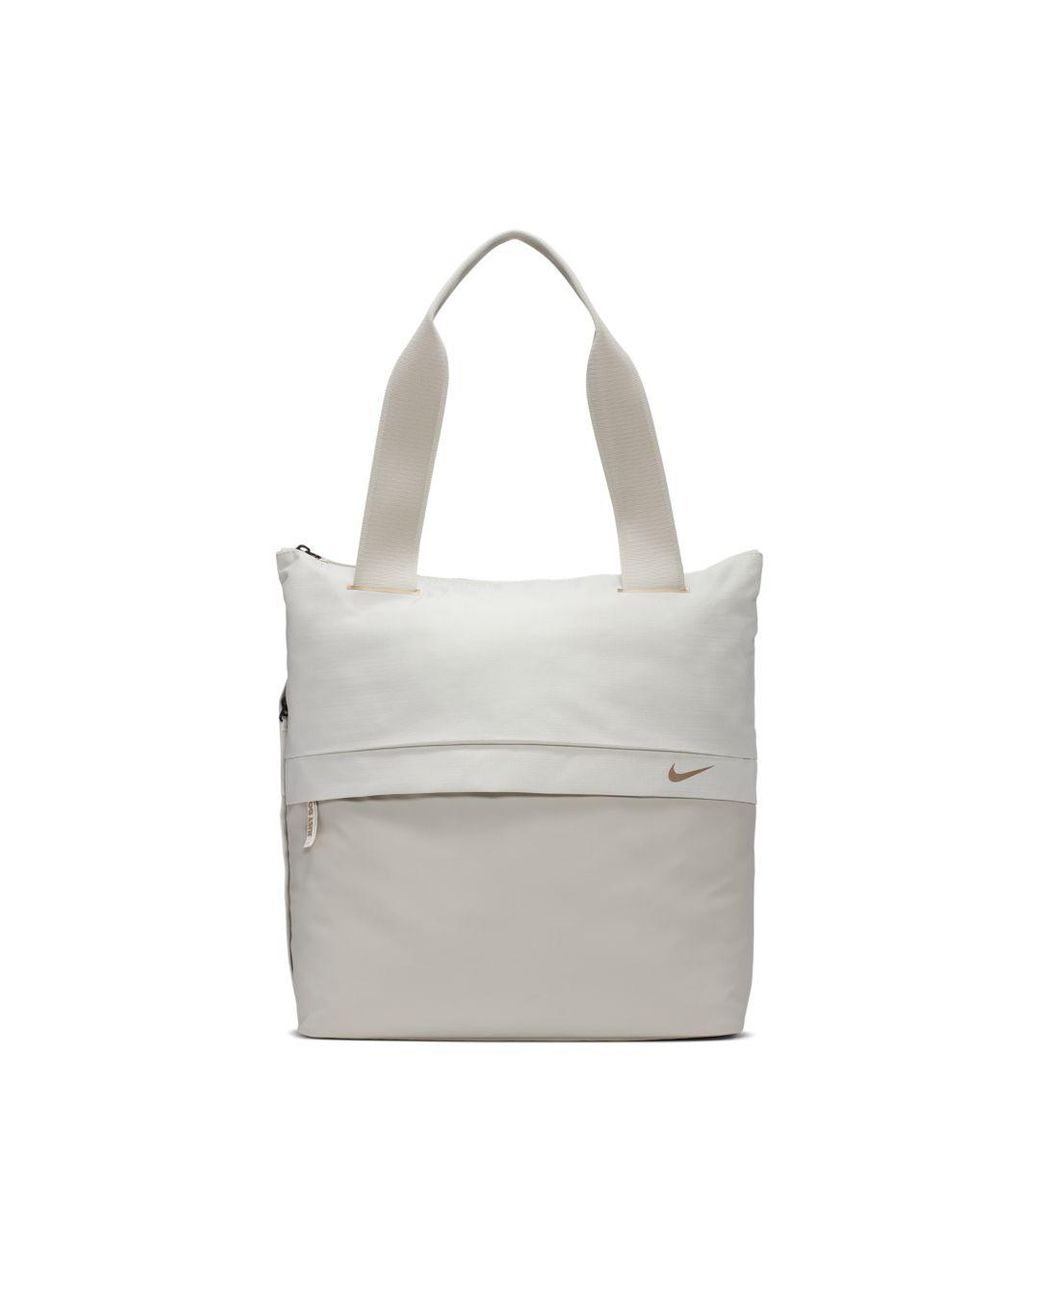 Nike Radiate Training Tote in Natural | Lyst